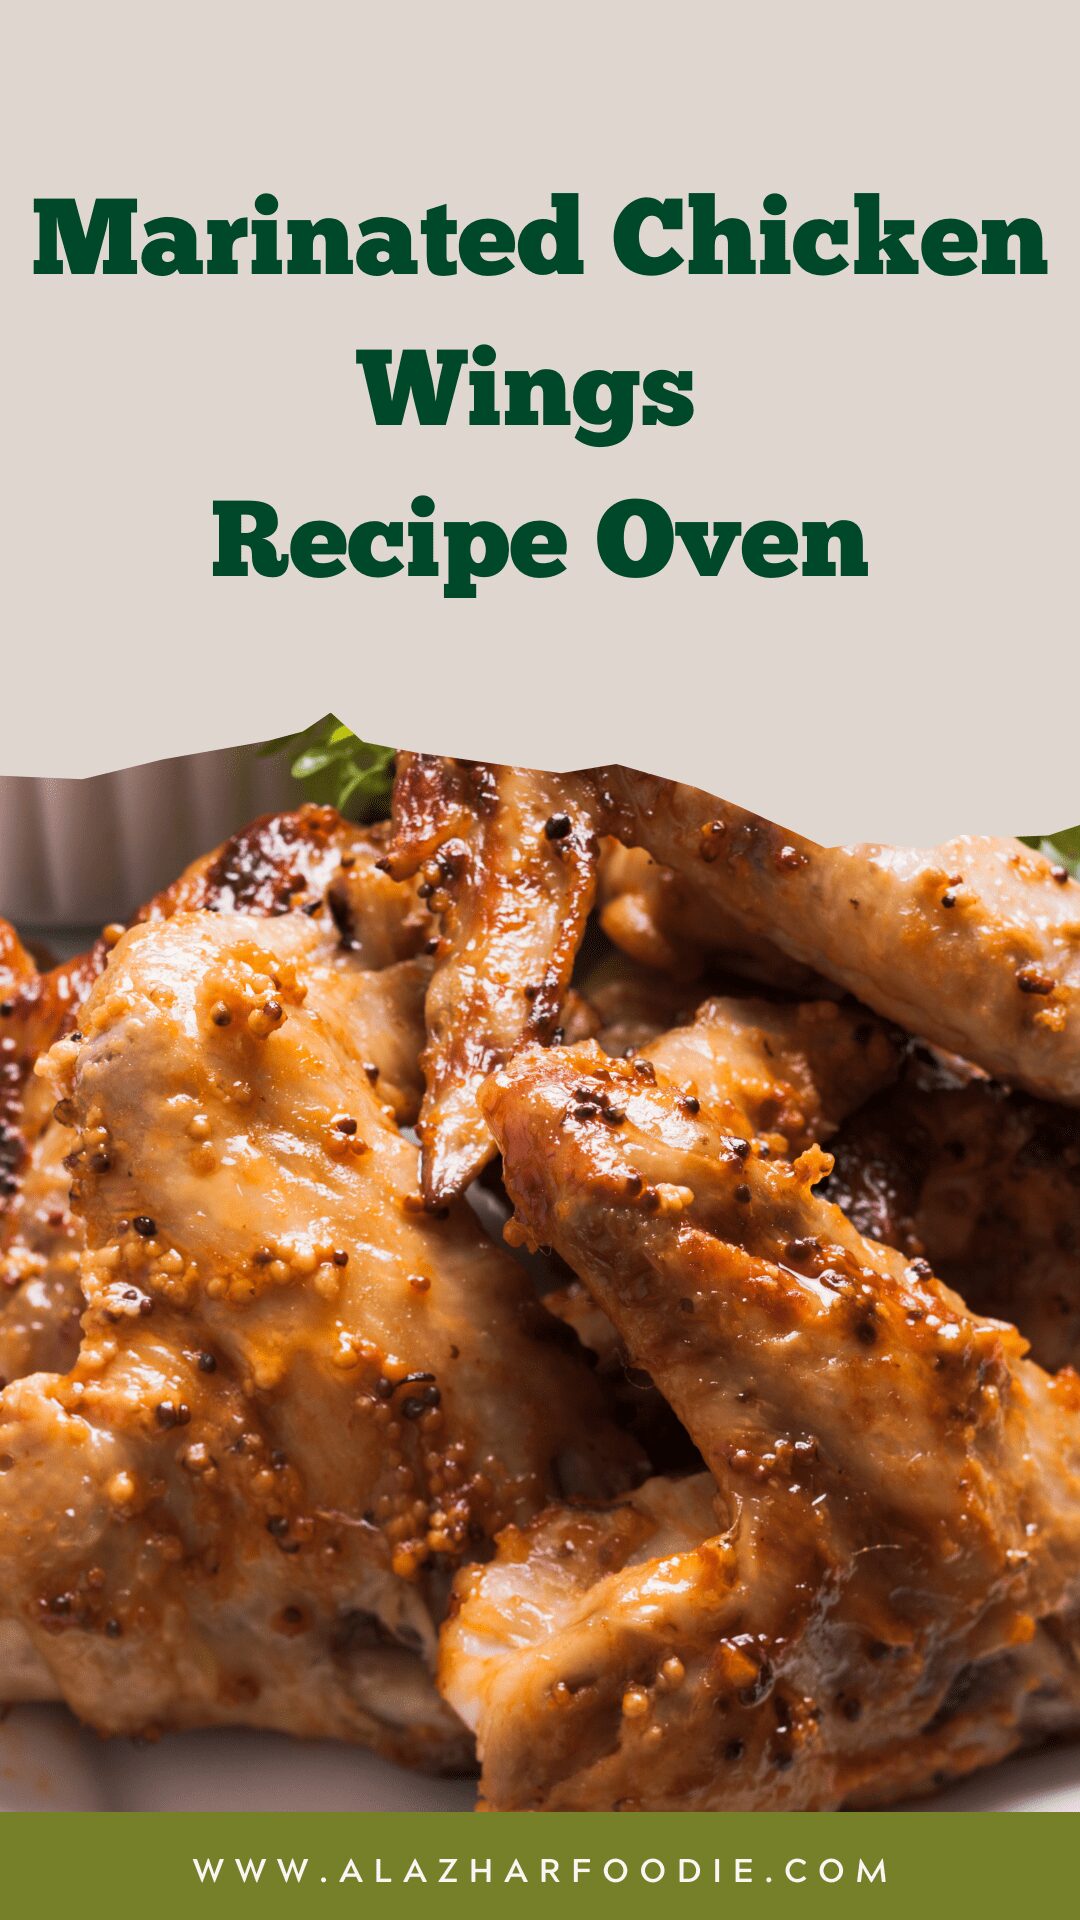 Marinated Chicken Wings Recipe Oven